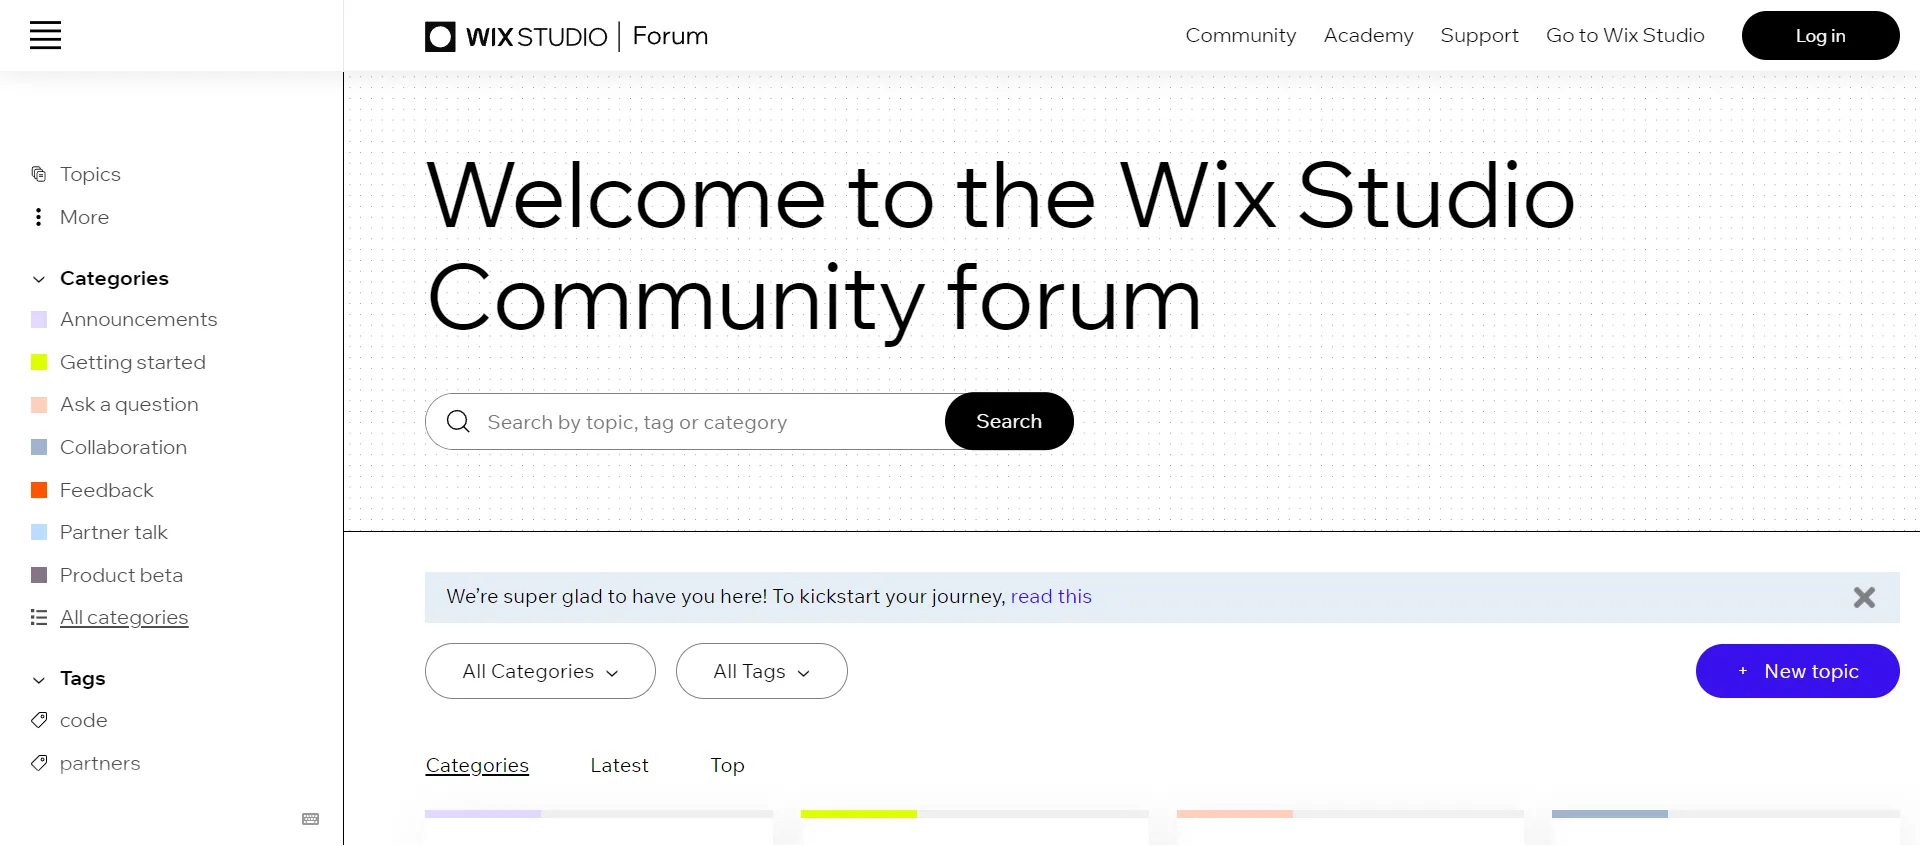 Access the Wix forum